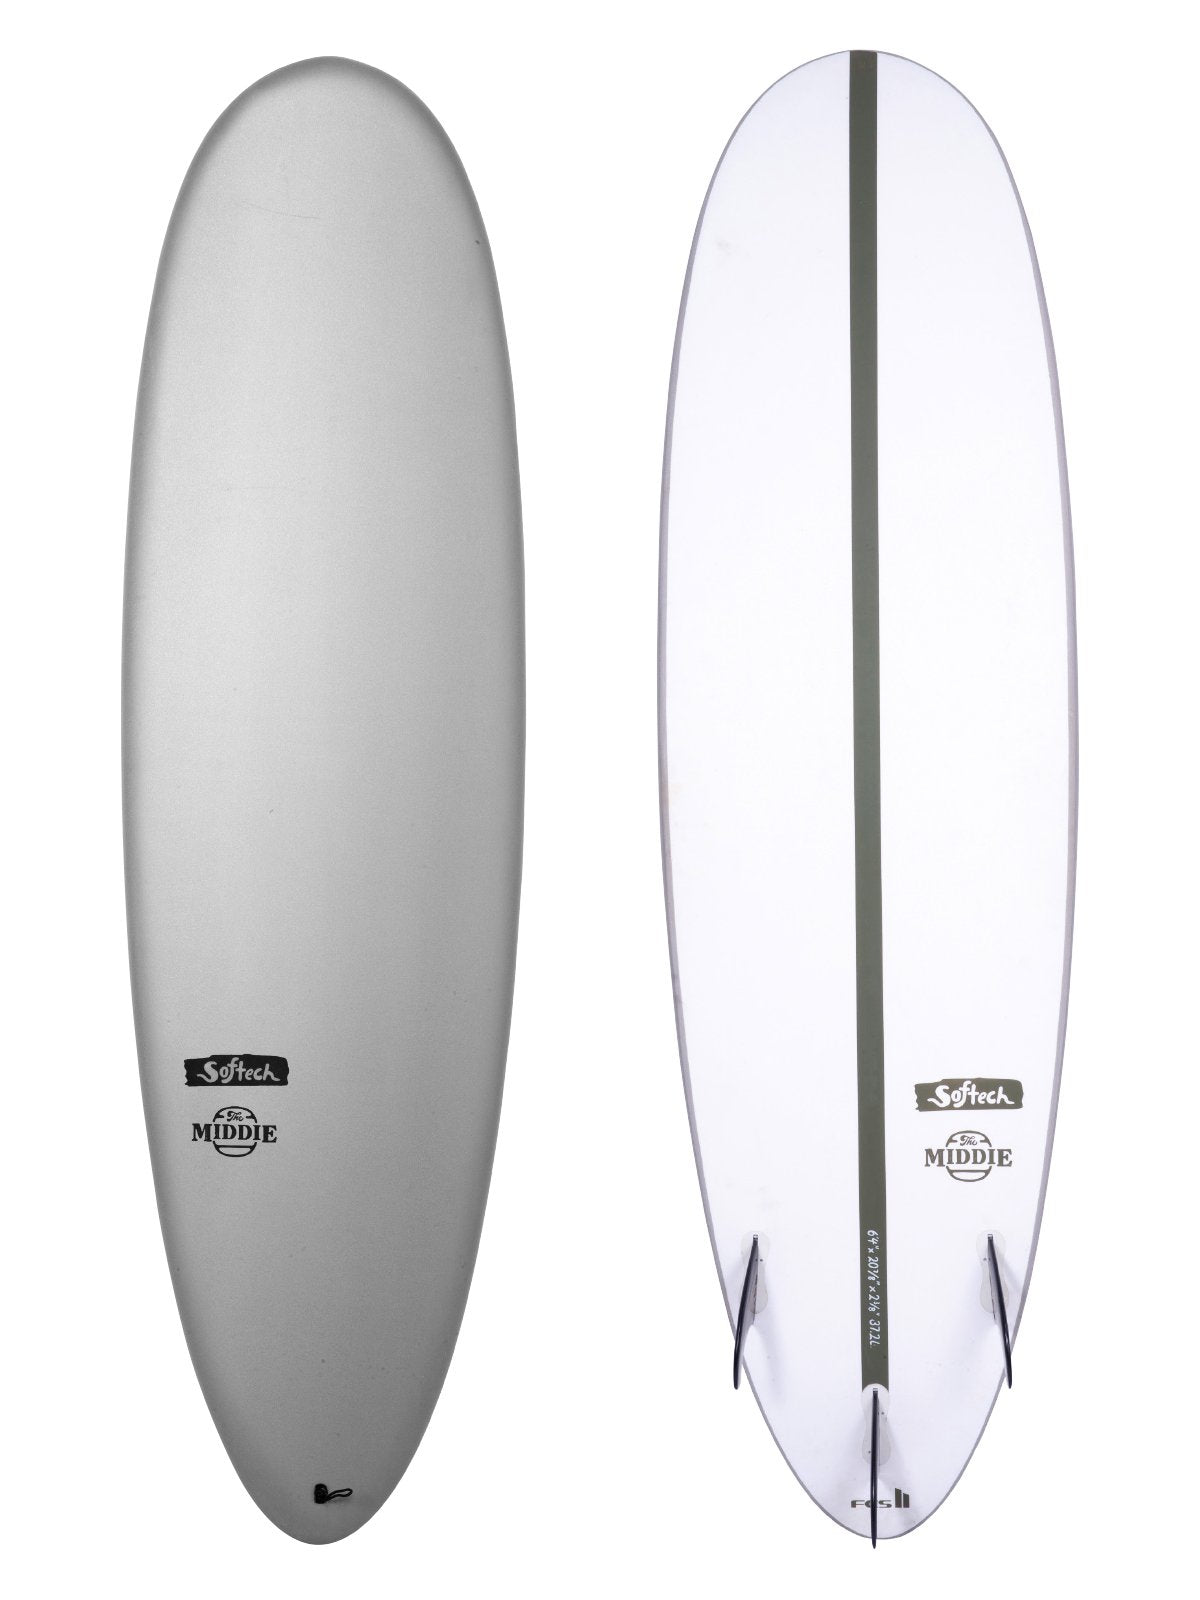 SOFTECH THE MIDDIE - Star Surf + Skate